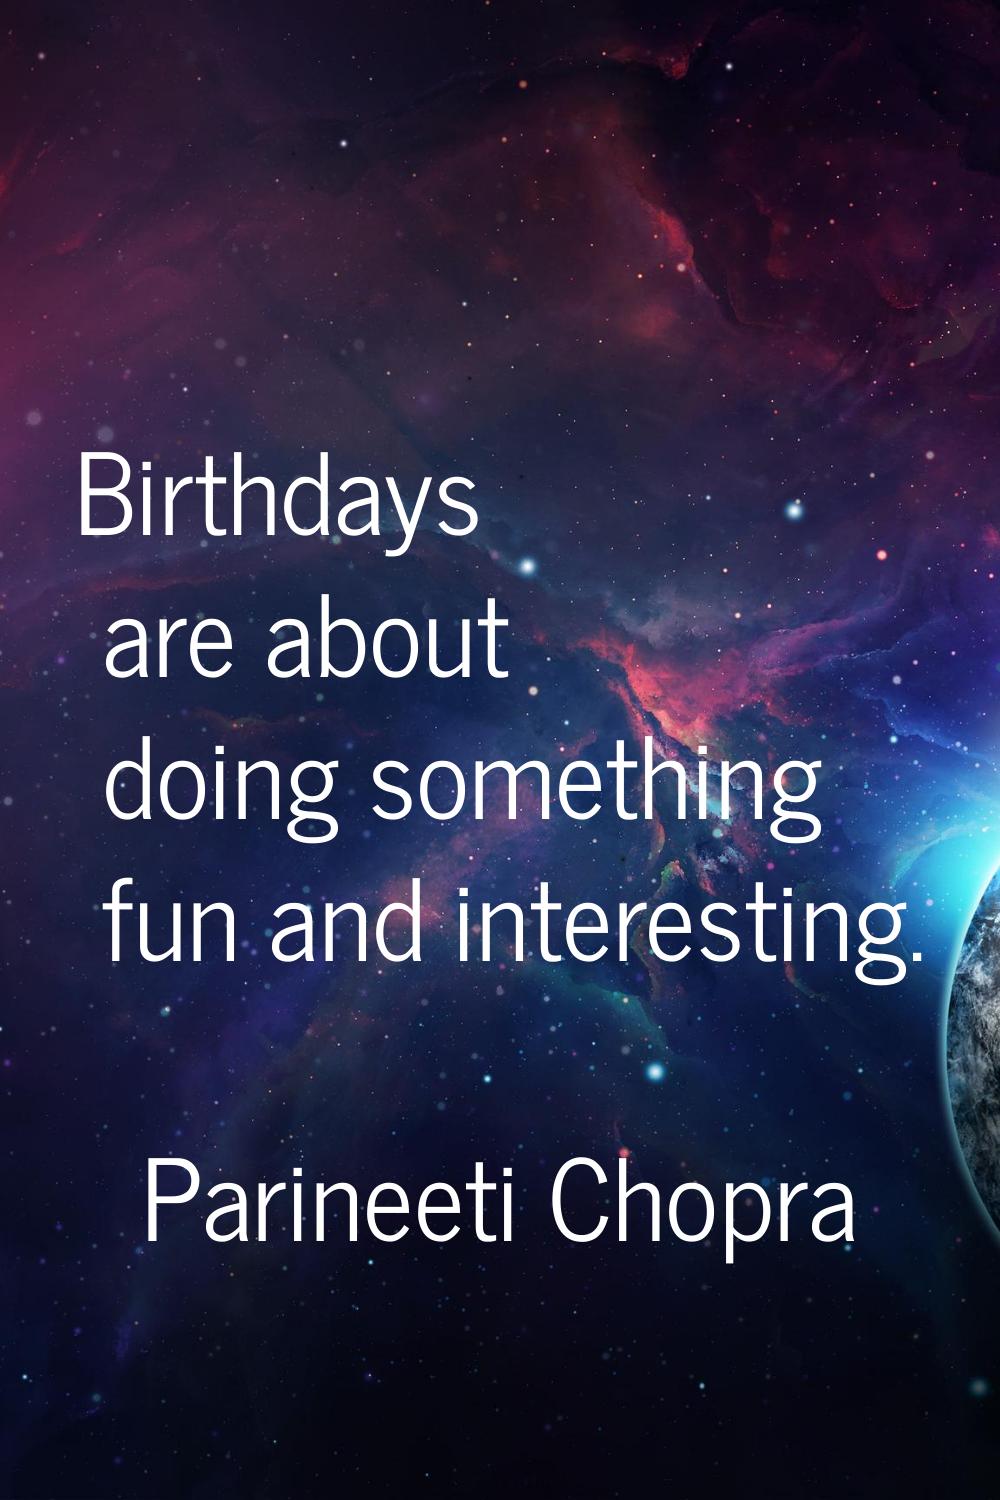 Birthdays are about doing something fun and interesting.